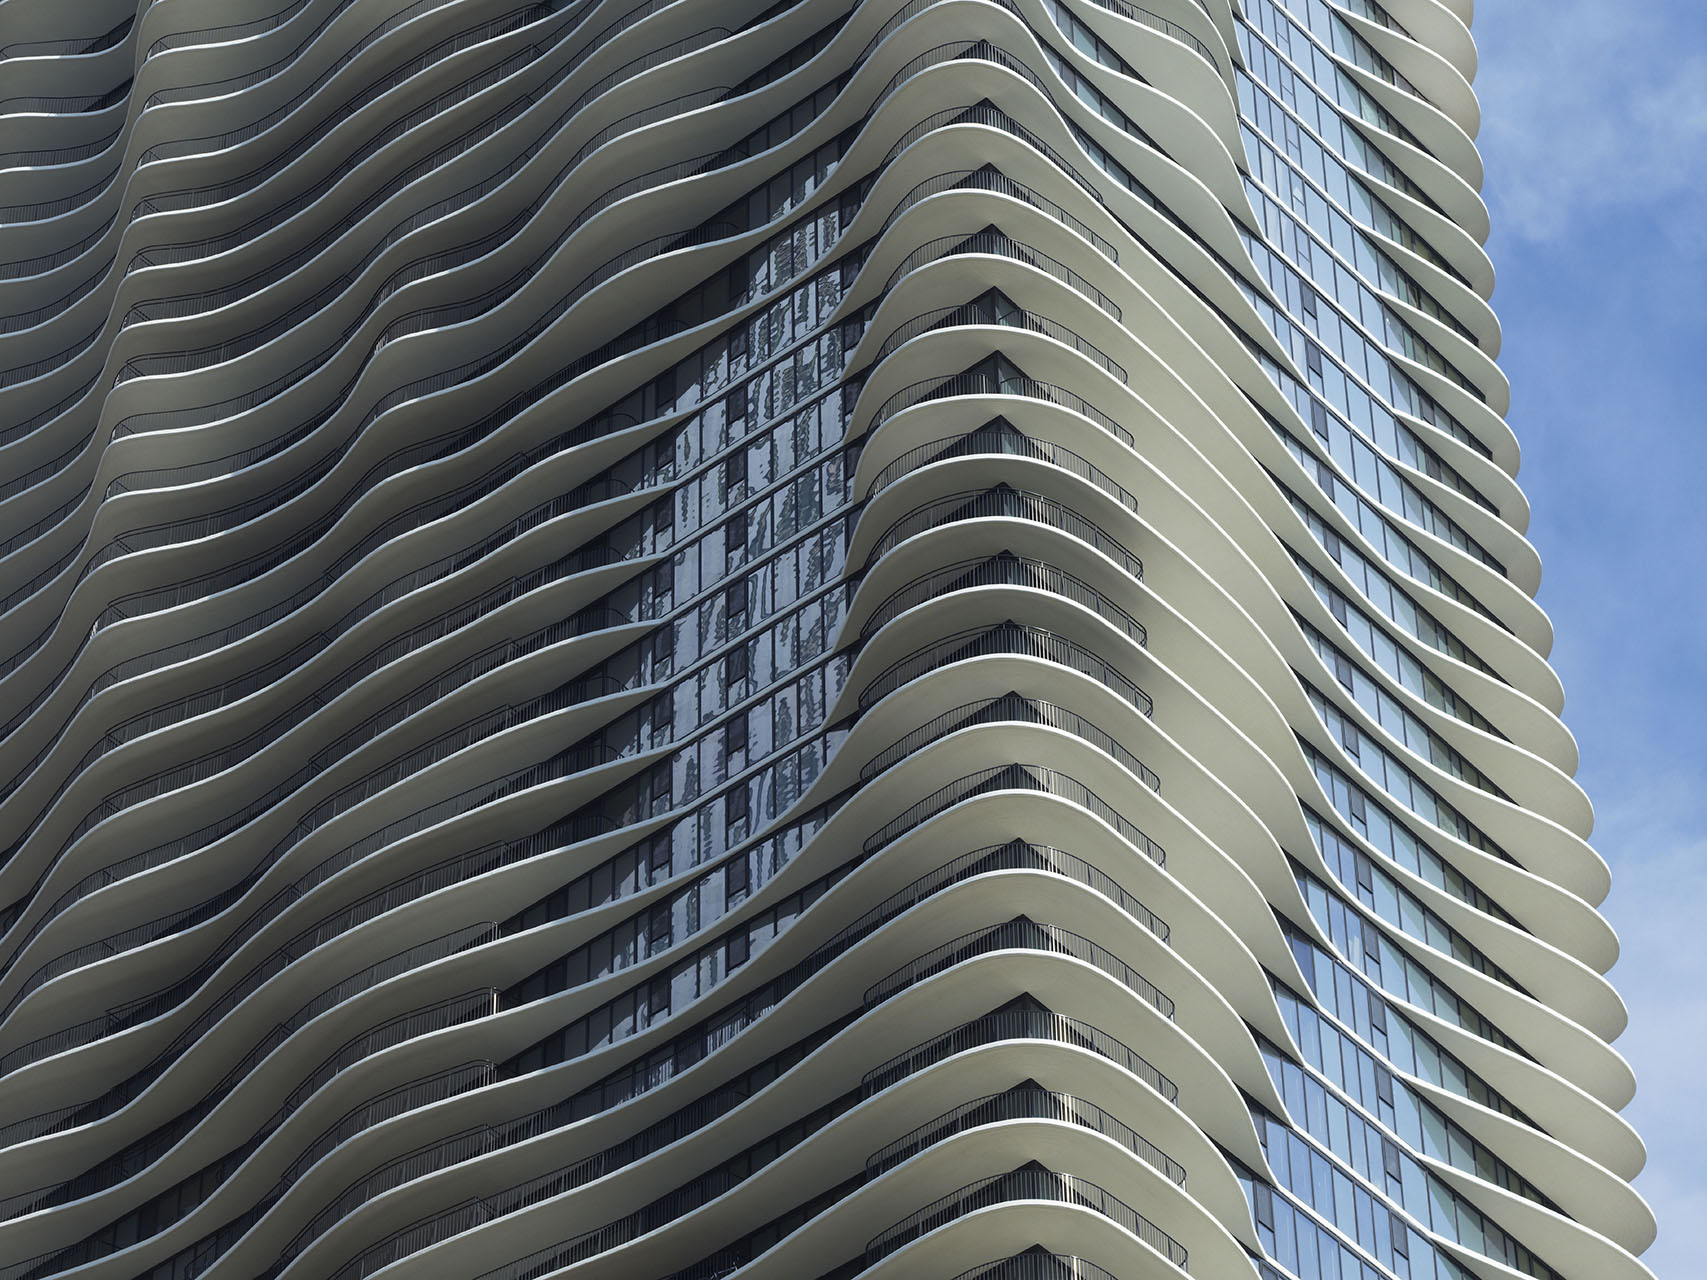 Chicago skyscraper with sinuous shapes